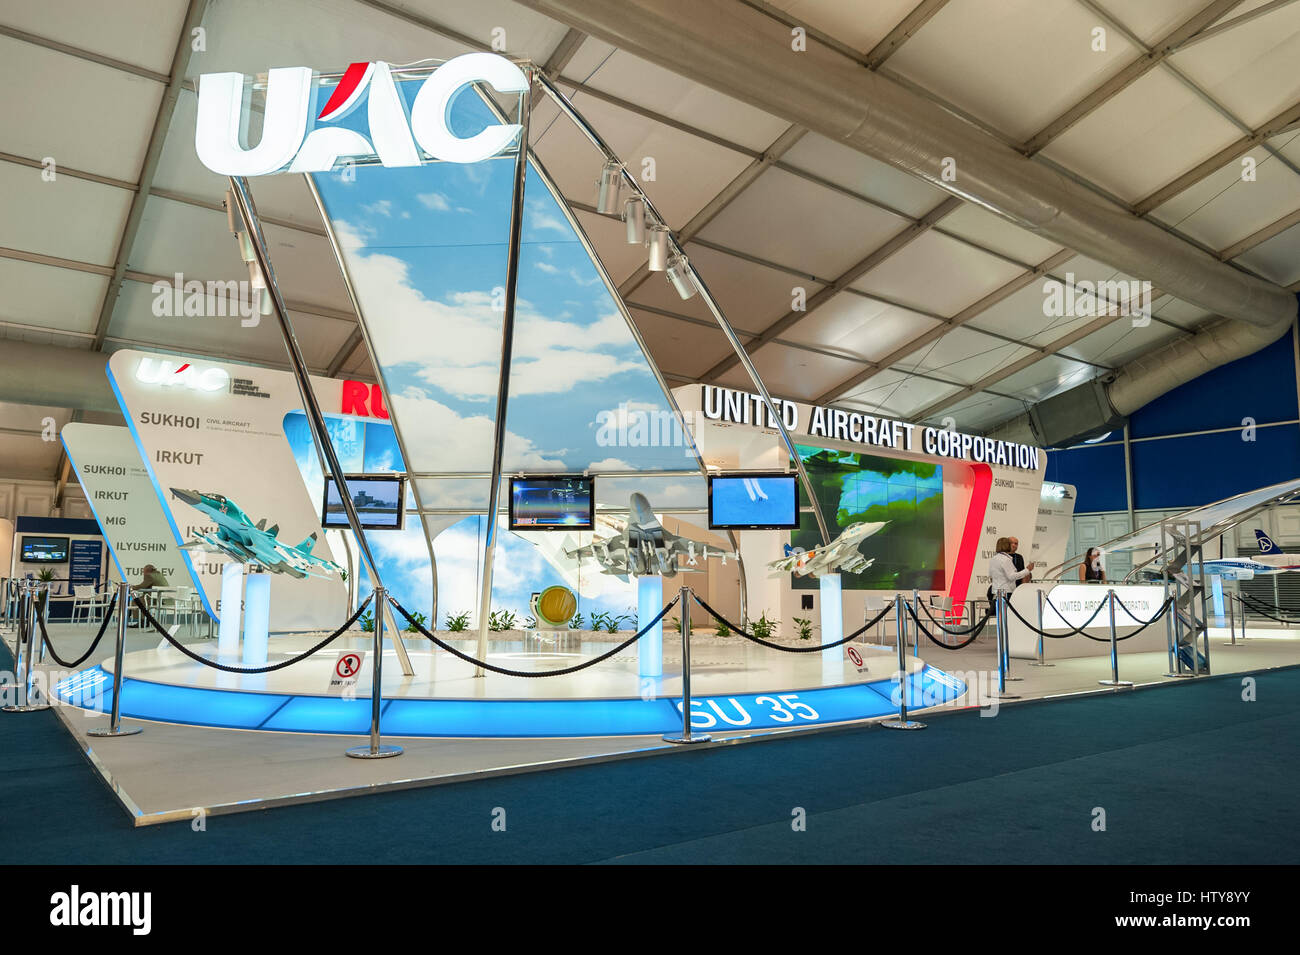 The United Aircraft Corporation (UAC) exhibition stand representing the Russian aviation industry at Farnborough Airshow. Stock Photo